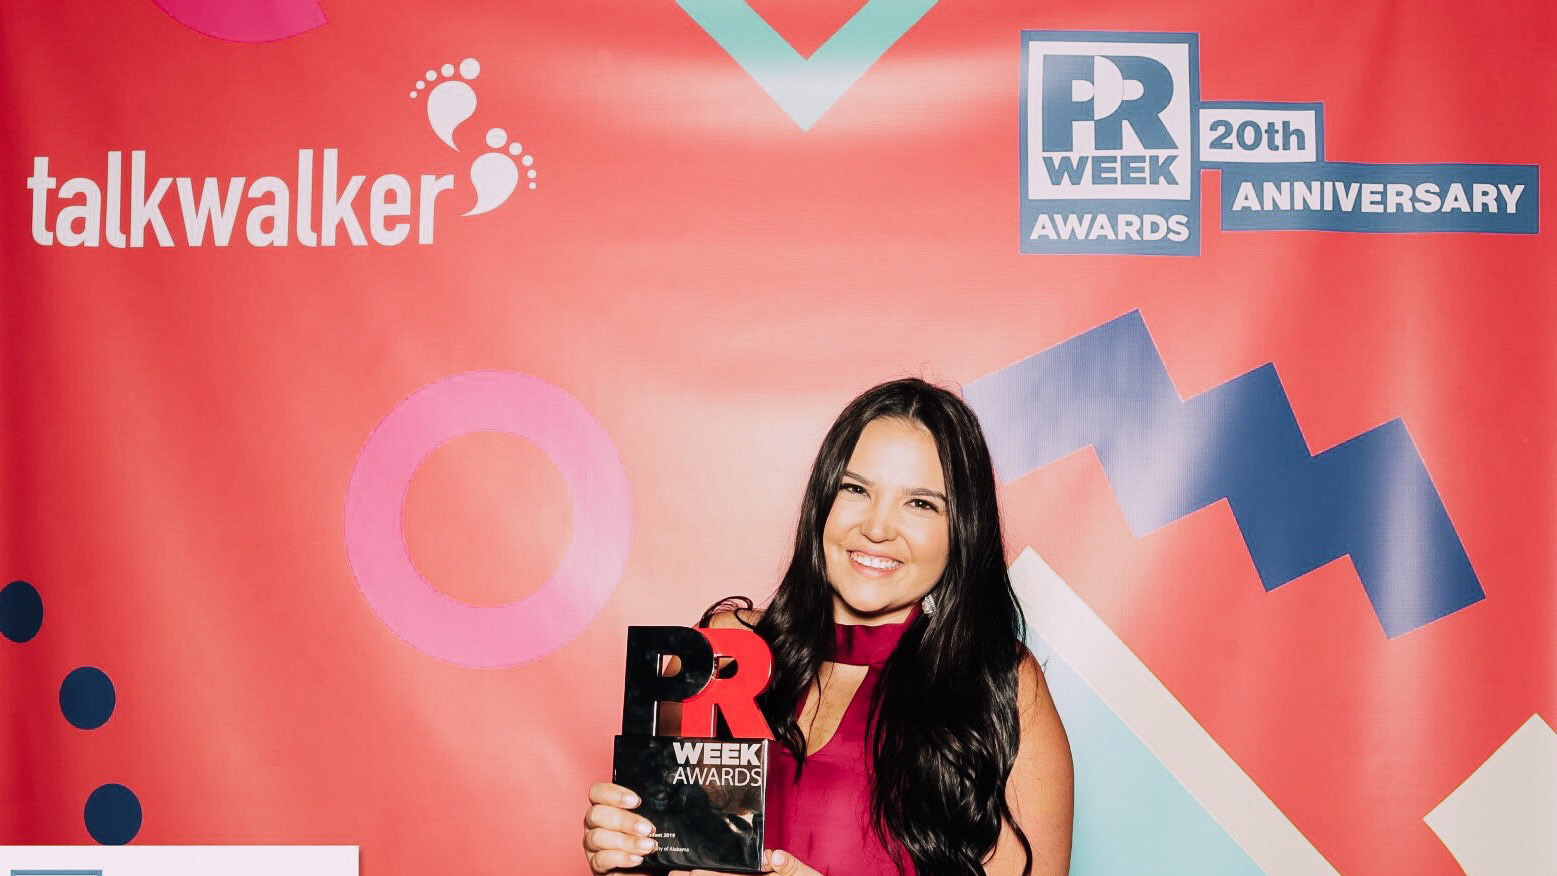 C&IS senior Alana Doyle is the PRWeek Public Relations Student of the Year.